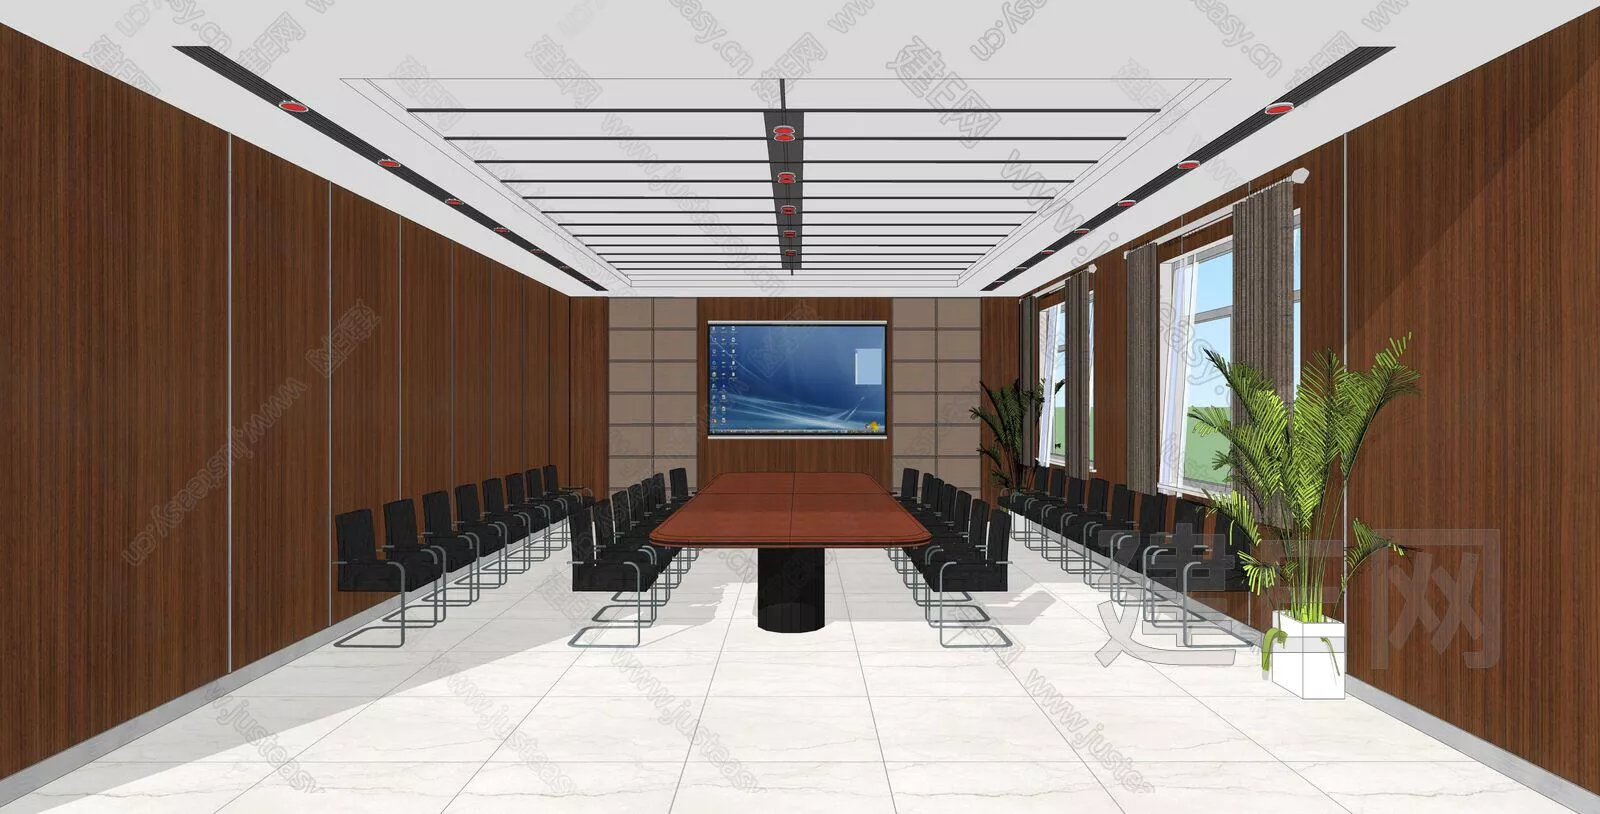 CHINESE MEETING ROOM - SKETCHUP 3D SCENE - ENSCAPE - 110379412